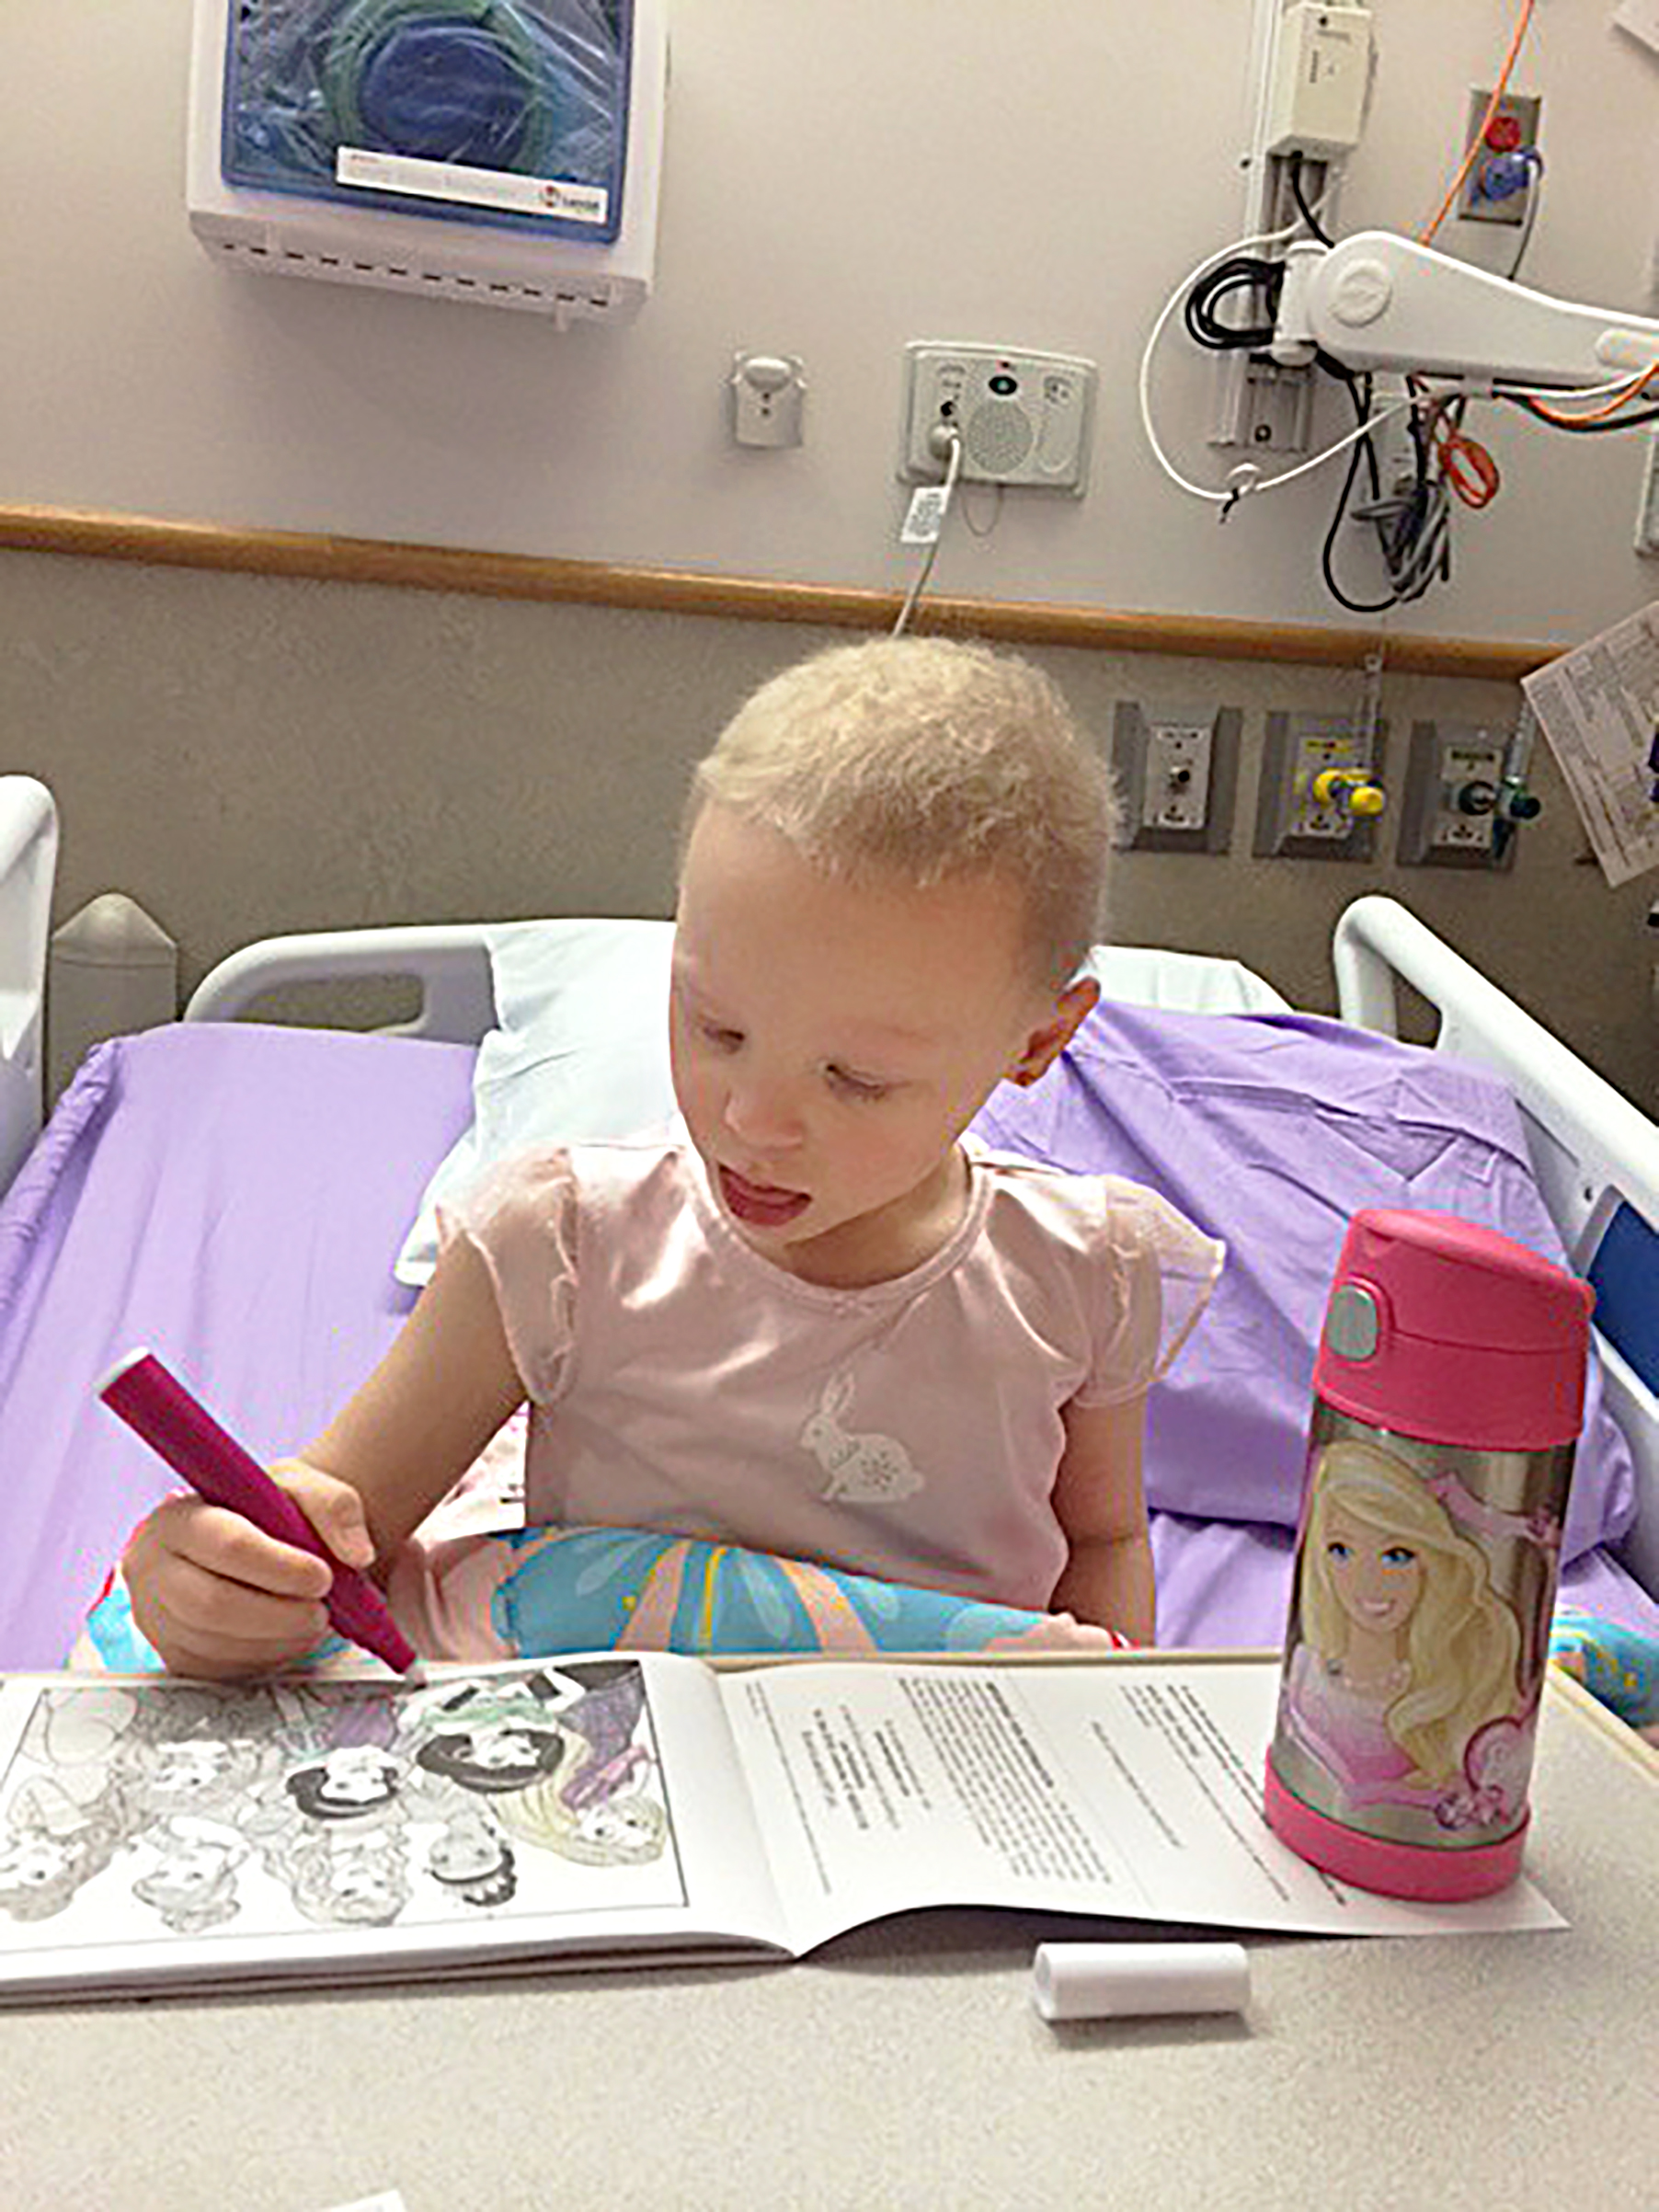 Kaitlyn at age 5, after receiving her own genetically modified immune cells (Courtesy Johnson Family)